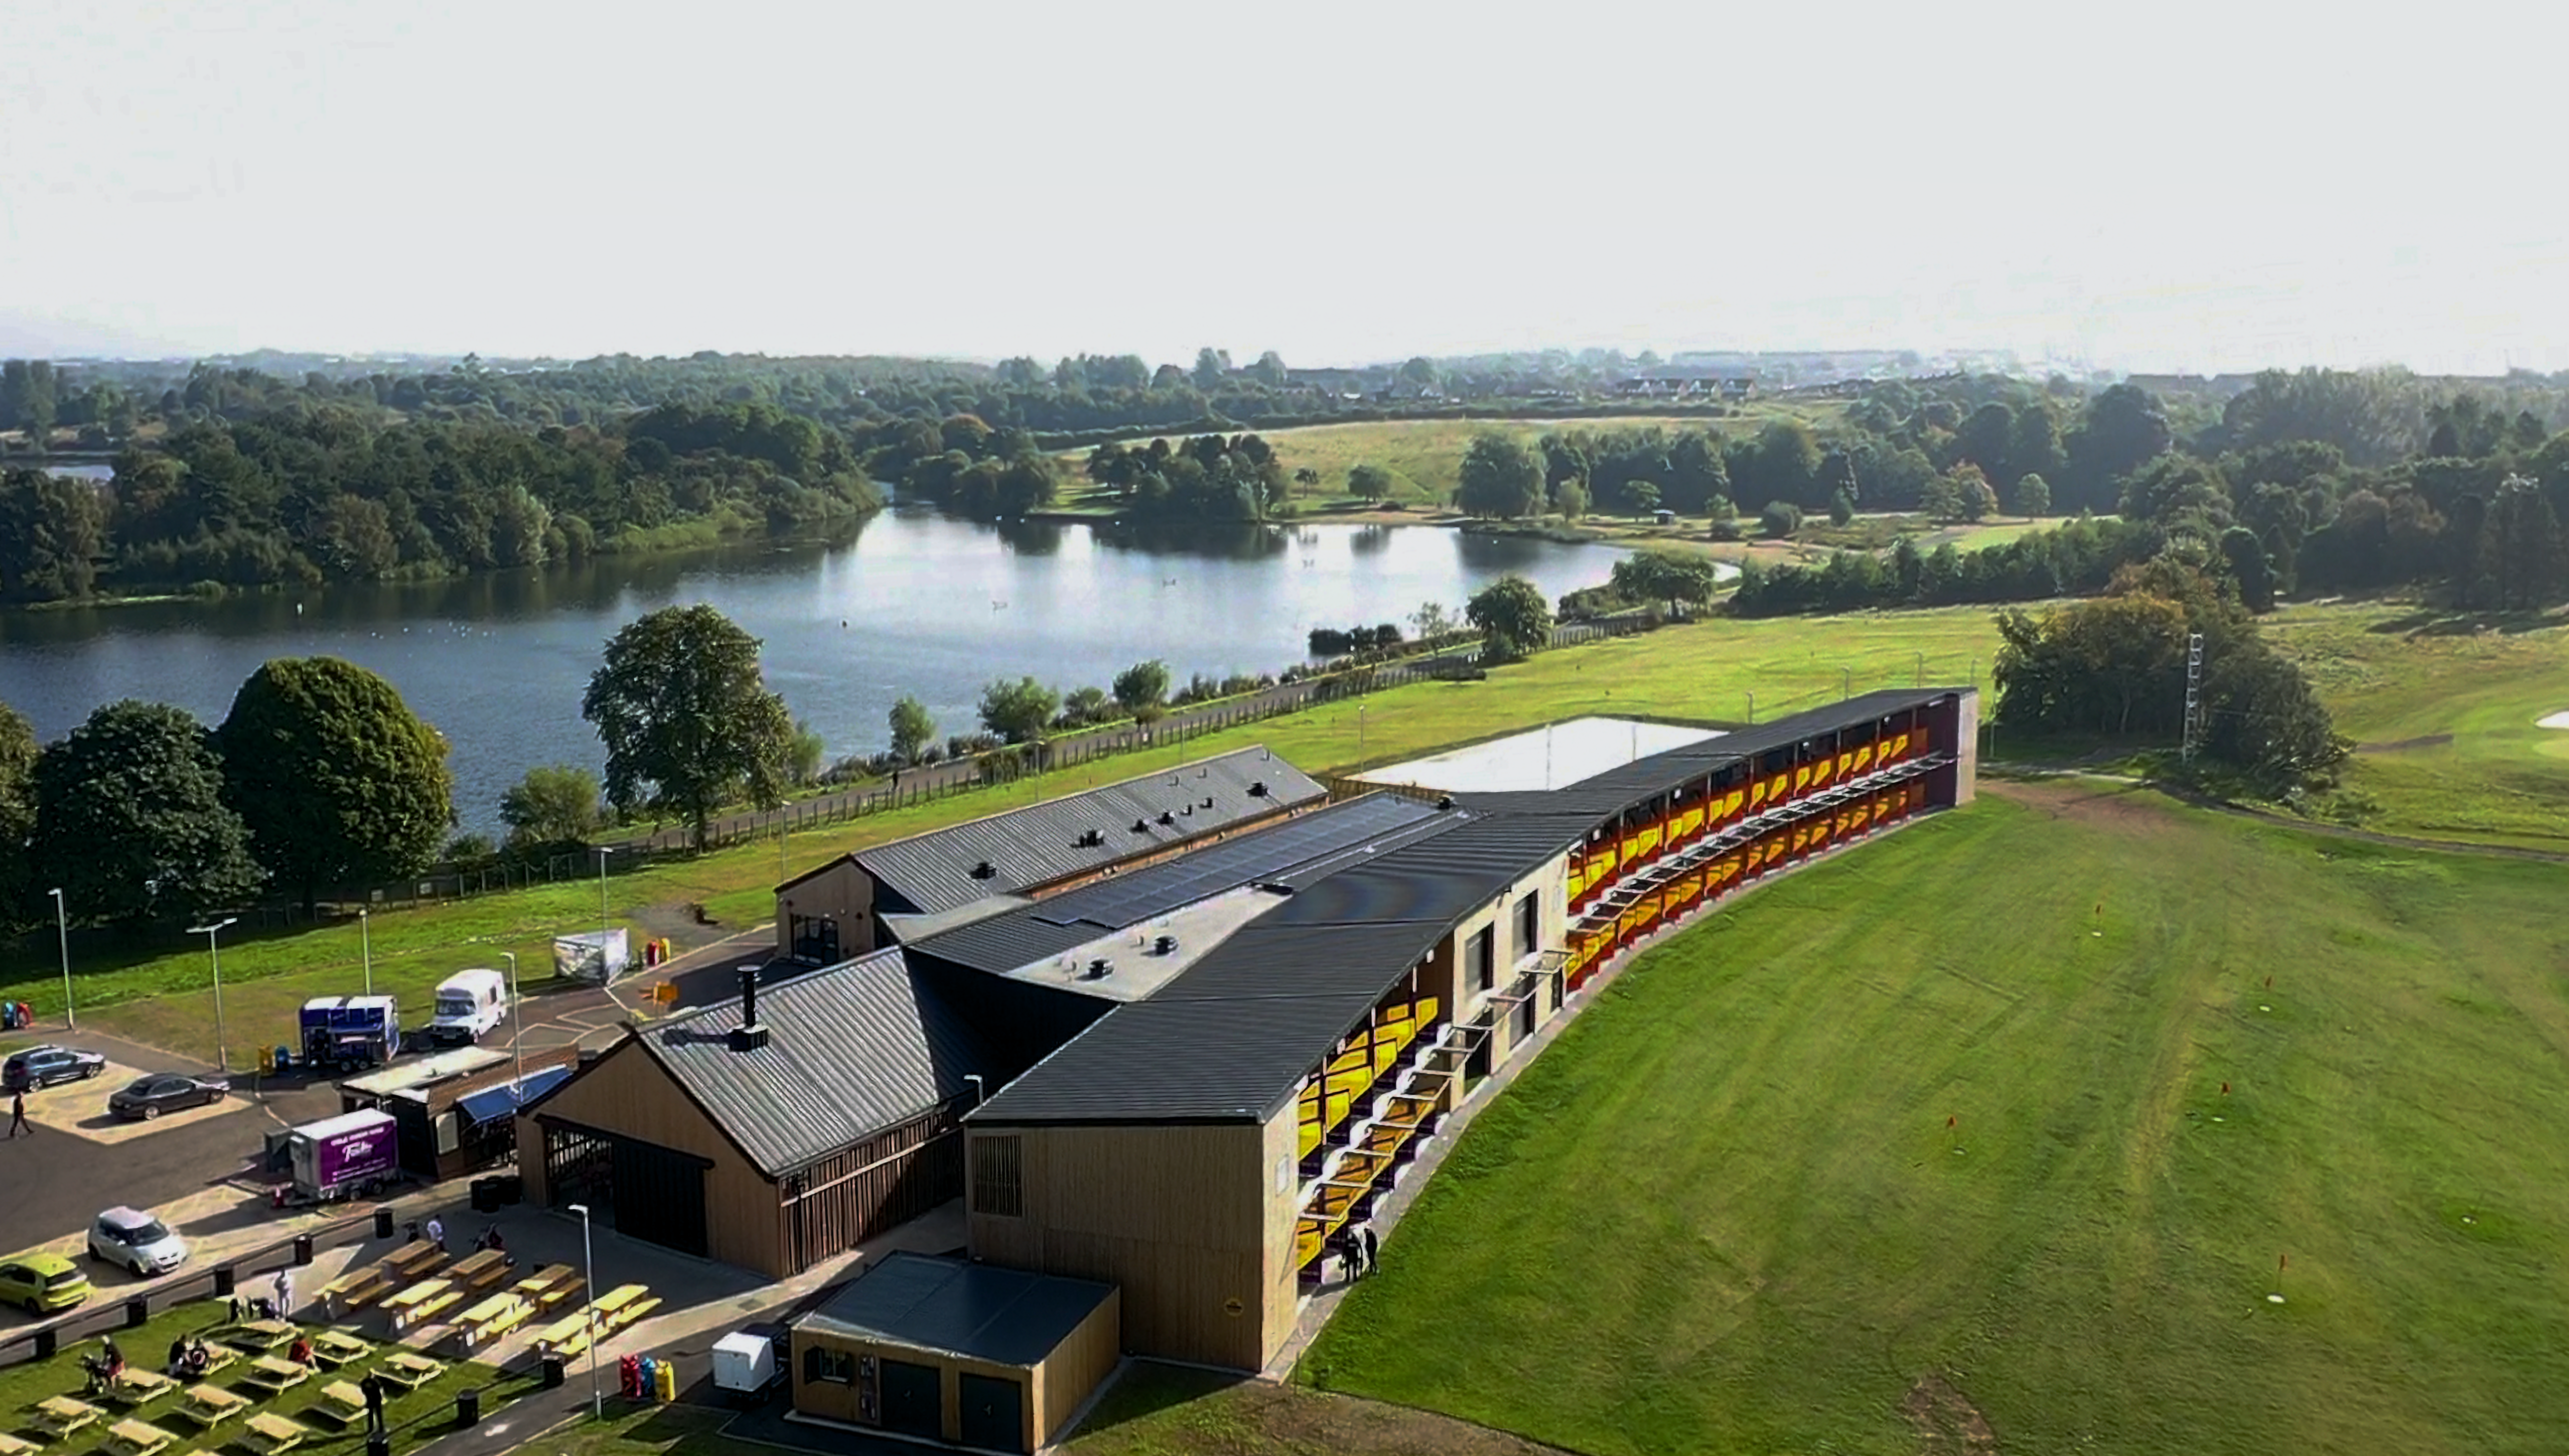 Drone shot of the 'Golf it!' driving range and golf venue in Glasgow, Scotland, with a PREFALZ roof system in P.10 black. The dark roof design creates an elegant contrast to the wooden façade of the building complex. The structure blends seamlessly into the surrounding landscape, with a clear view of the neighbouring lake and the lush greenery of the golf course. The roofs of the individual building components with their uniform, black Prefa aluminium cladding stand out against the natural backdrop and demonstrate the harmonious combination of modern architecture and natural beauty.